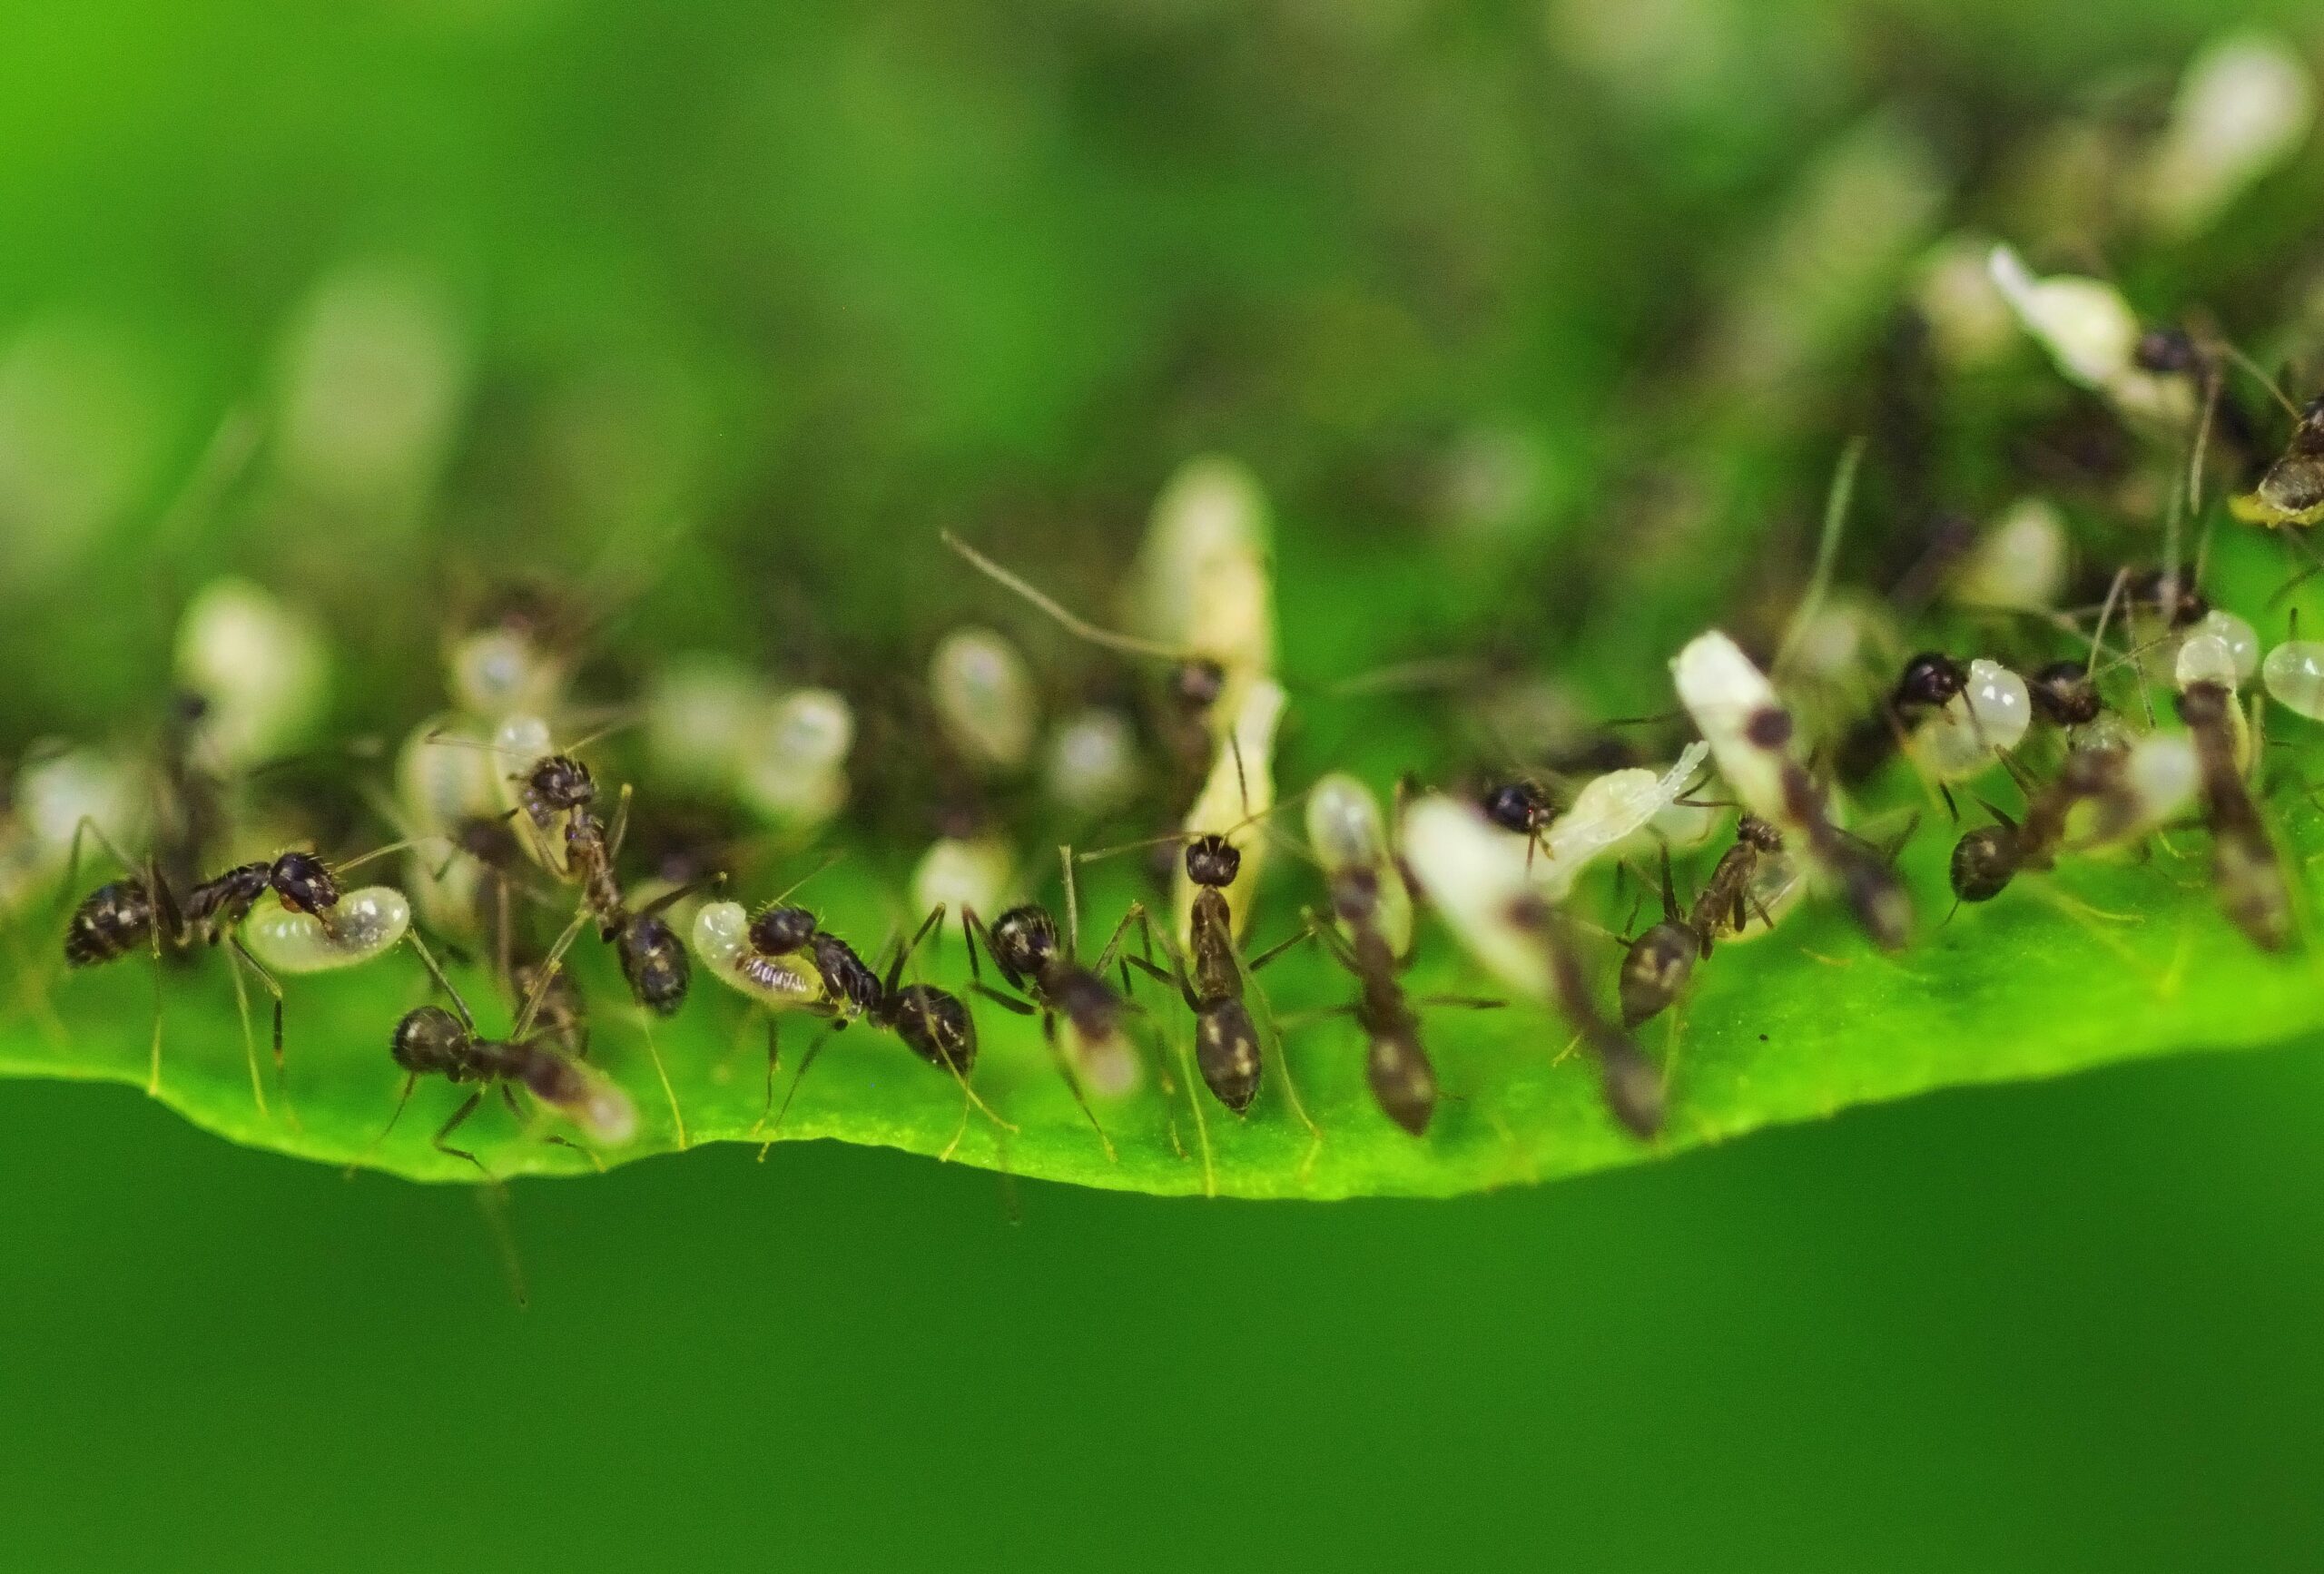 Many small black ants carry round, white eggs about their same size across a leaf.